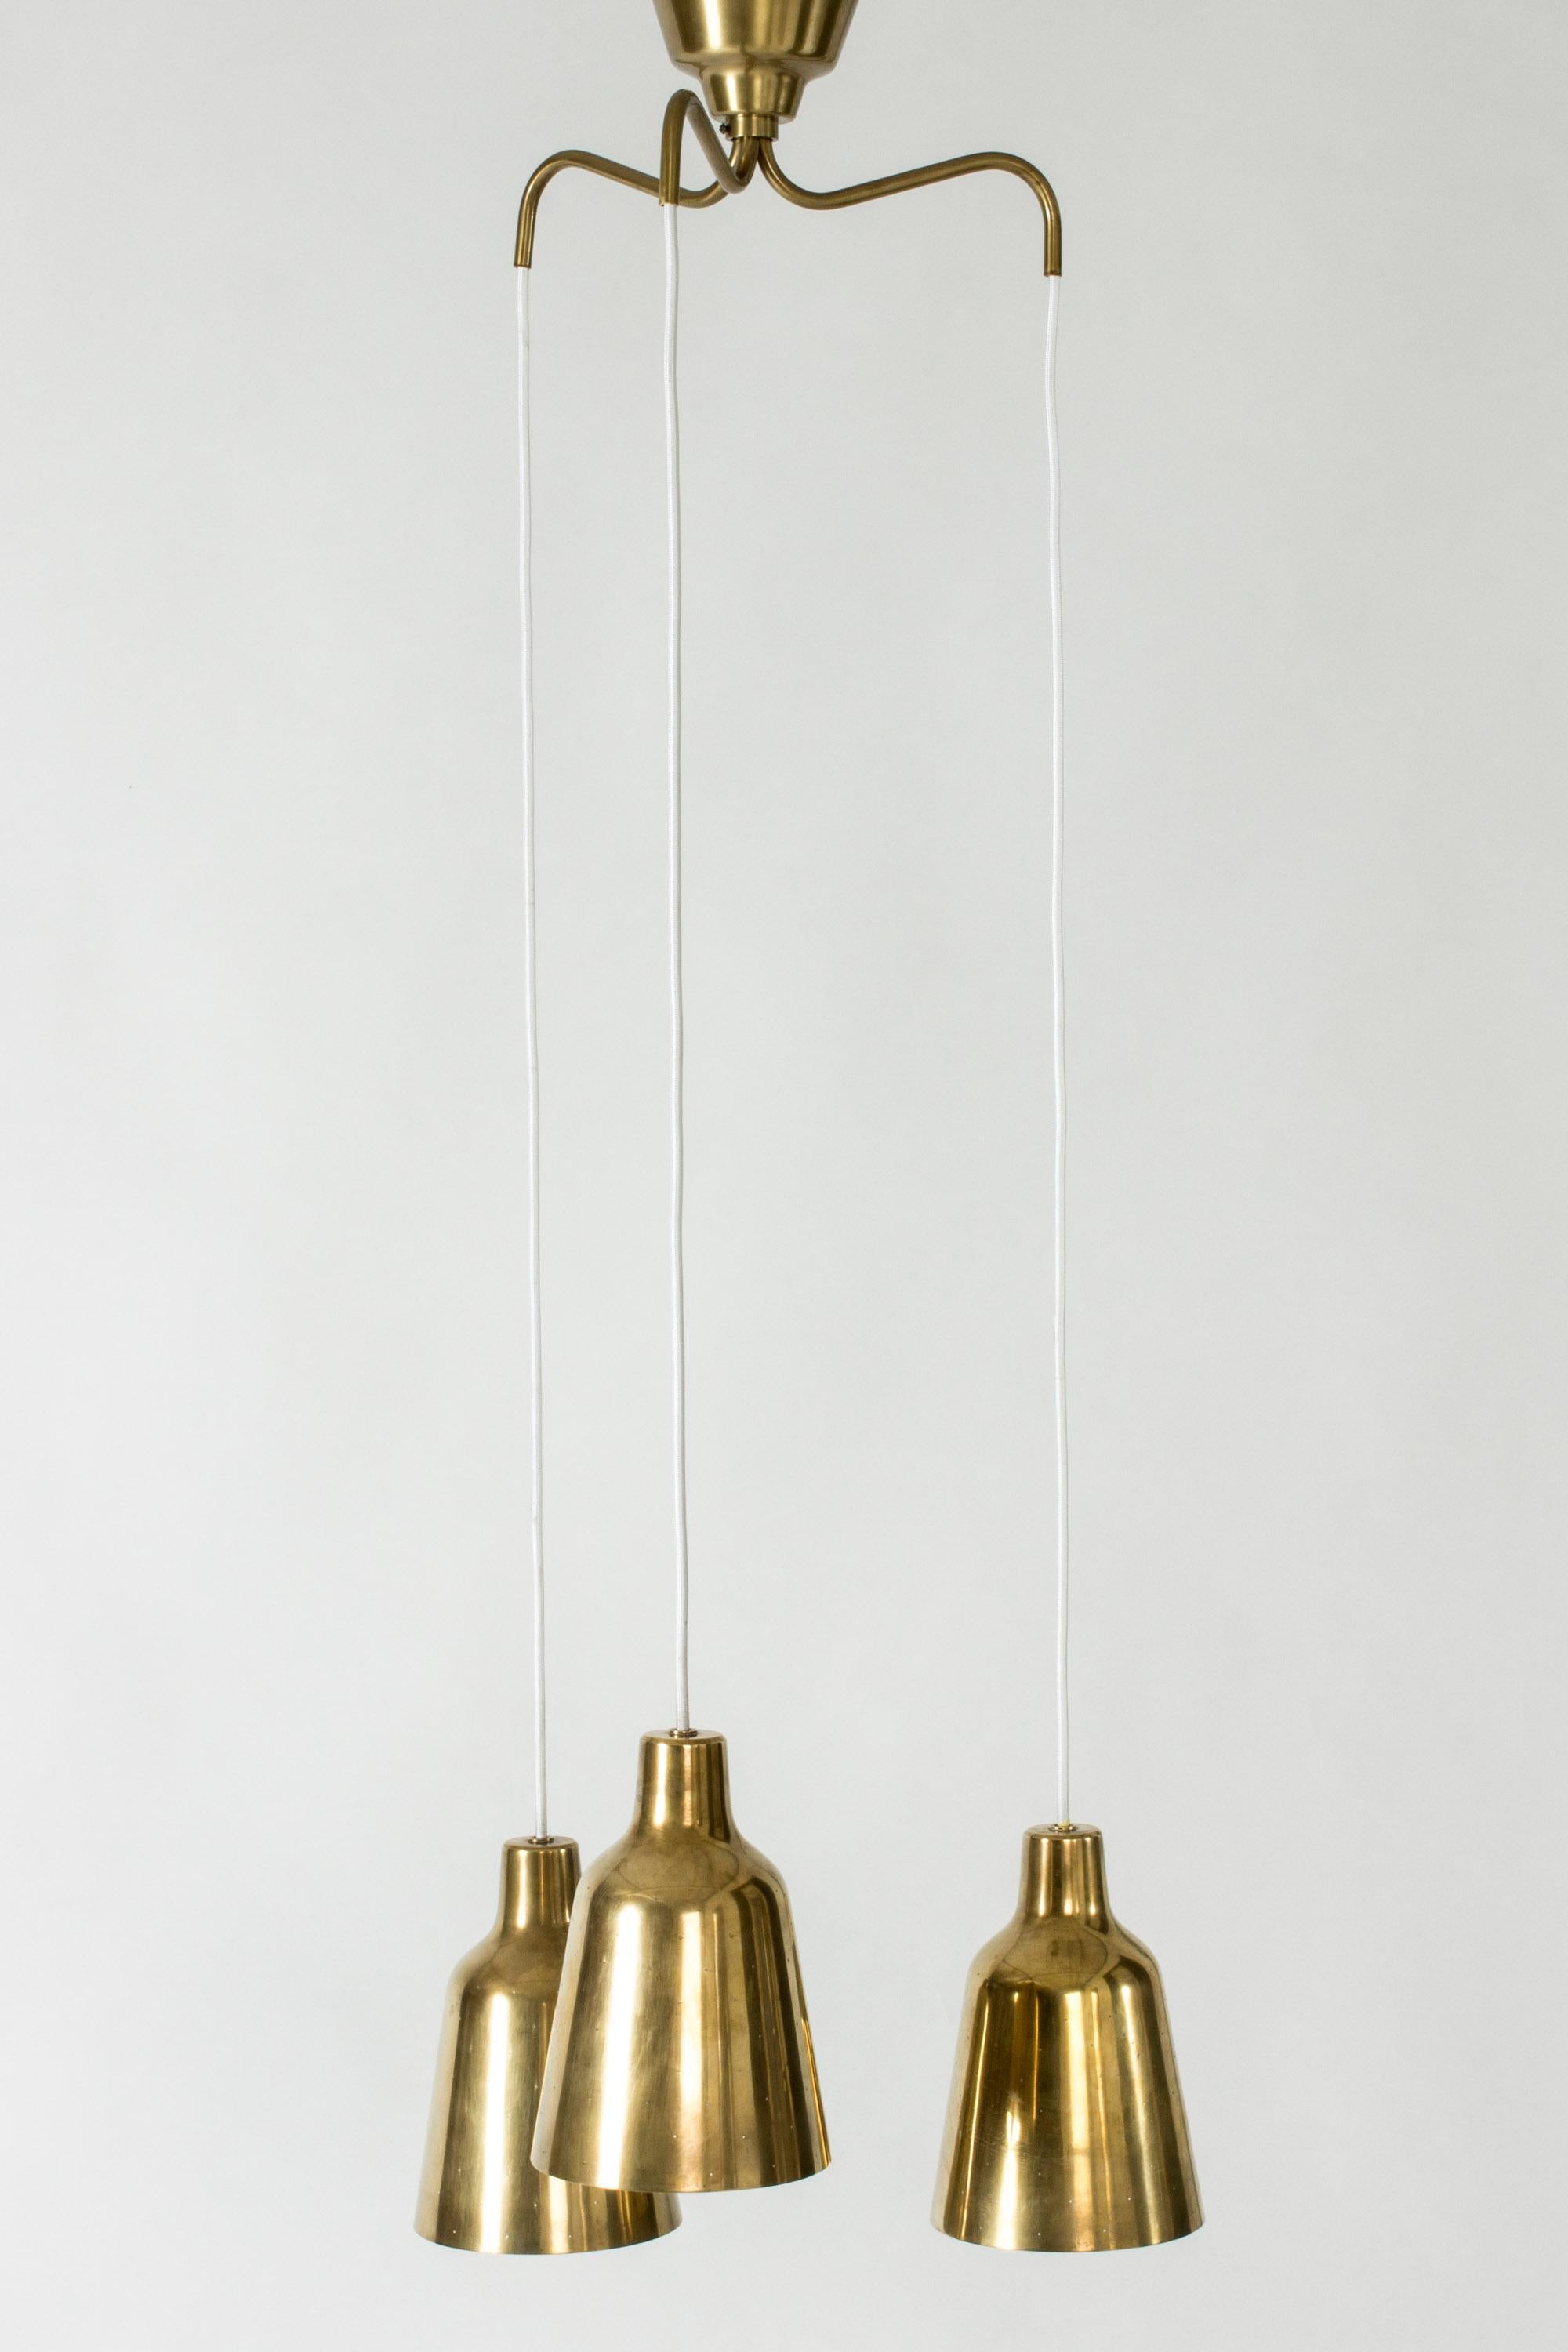 Elegant ceiling lamp by Hans-Agne Jakobsson, with three brass shades. The shades are perforated with small holes that shine warmly when lit.

Measures: Height of the cups 21 cm, diameter 14.5 cm.

Hans Bergström was the owner and creative